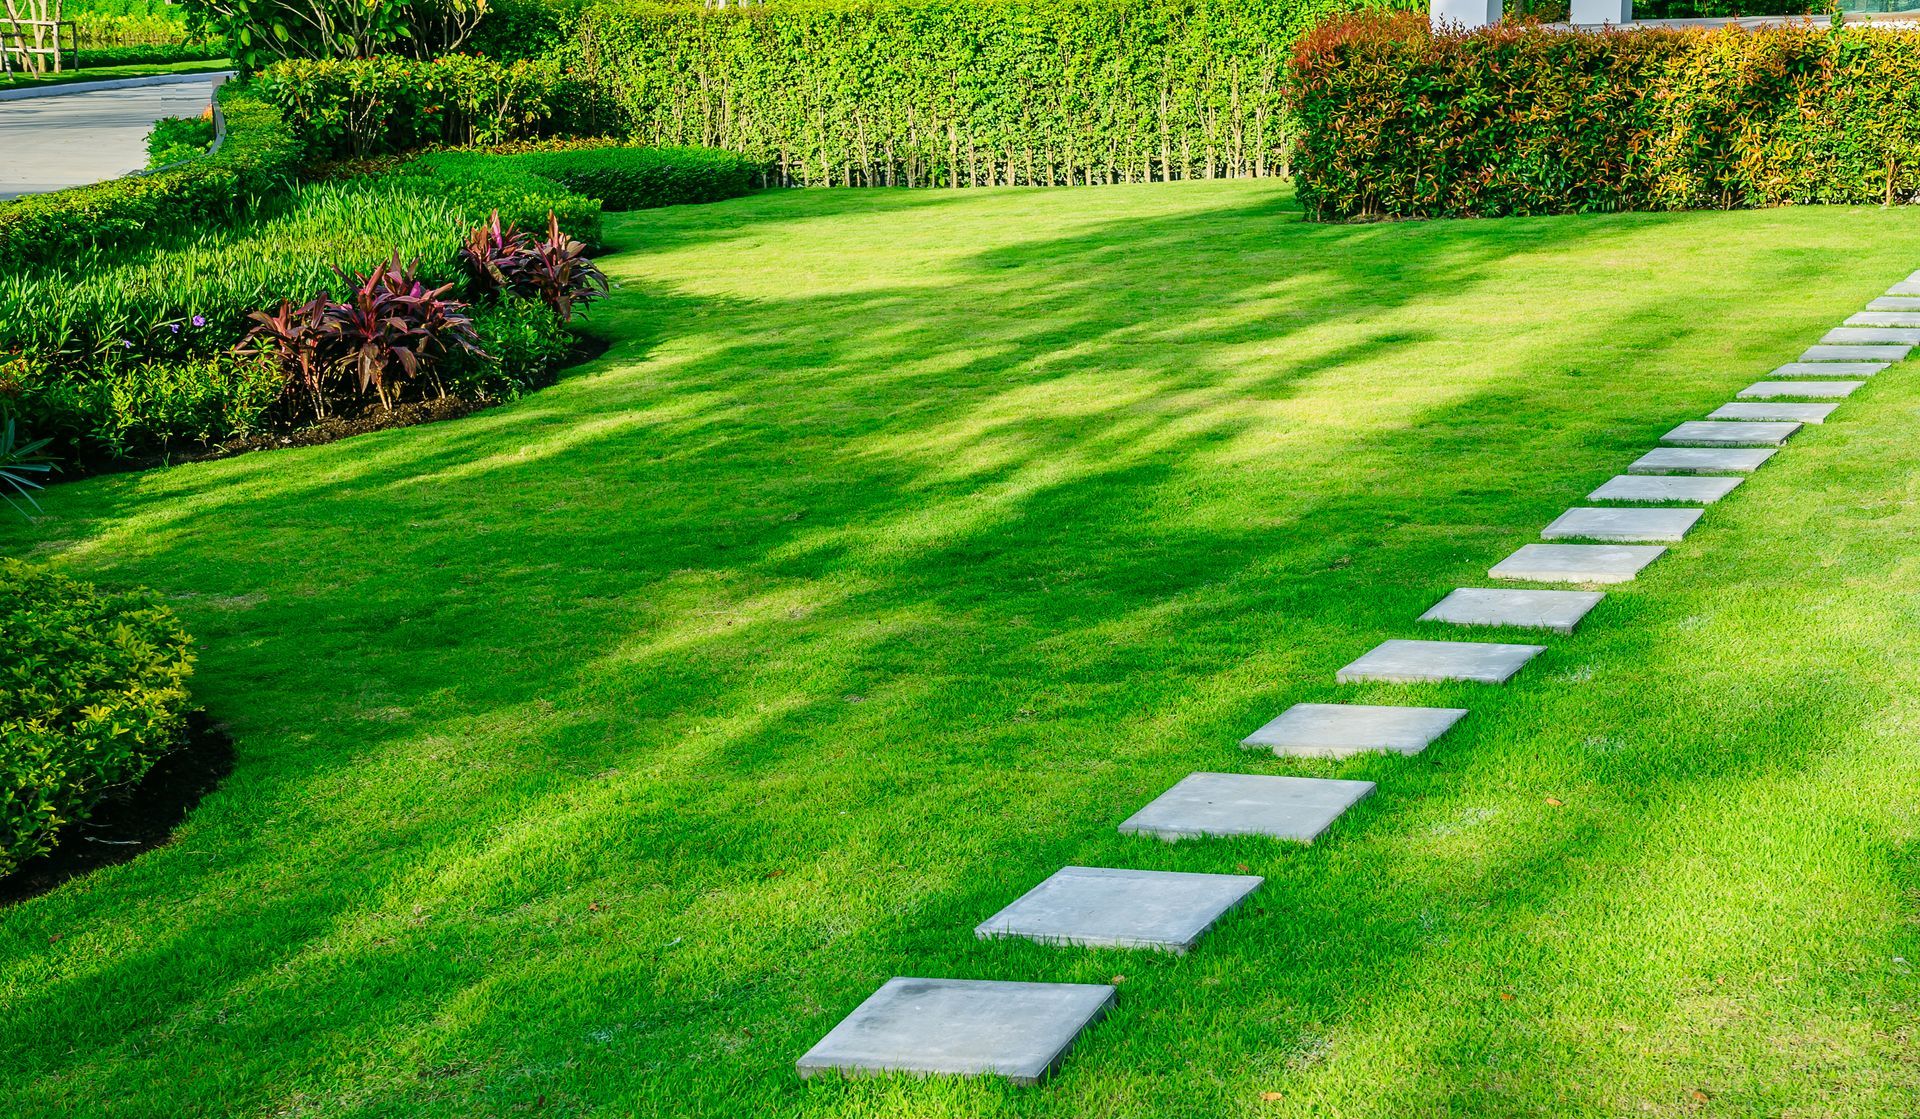 Clean Lawn with Stone Walkways